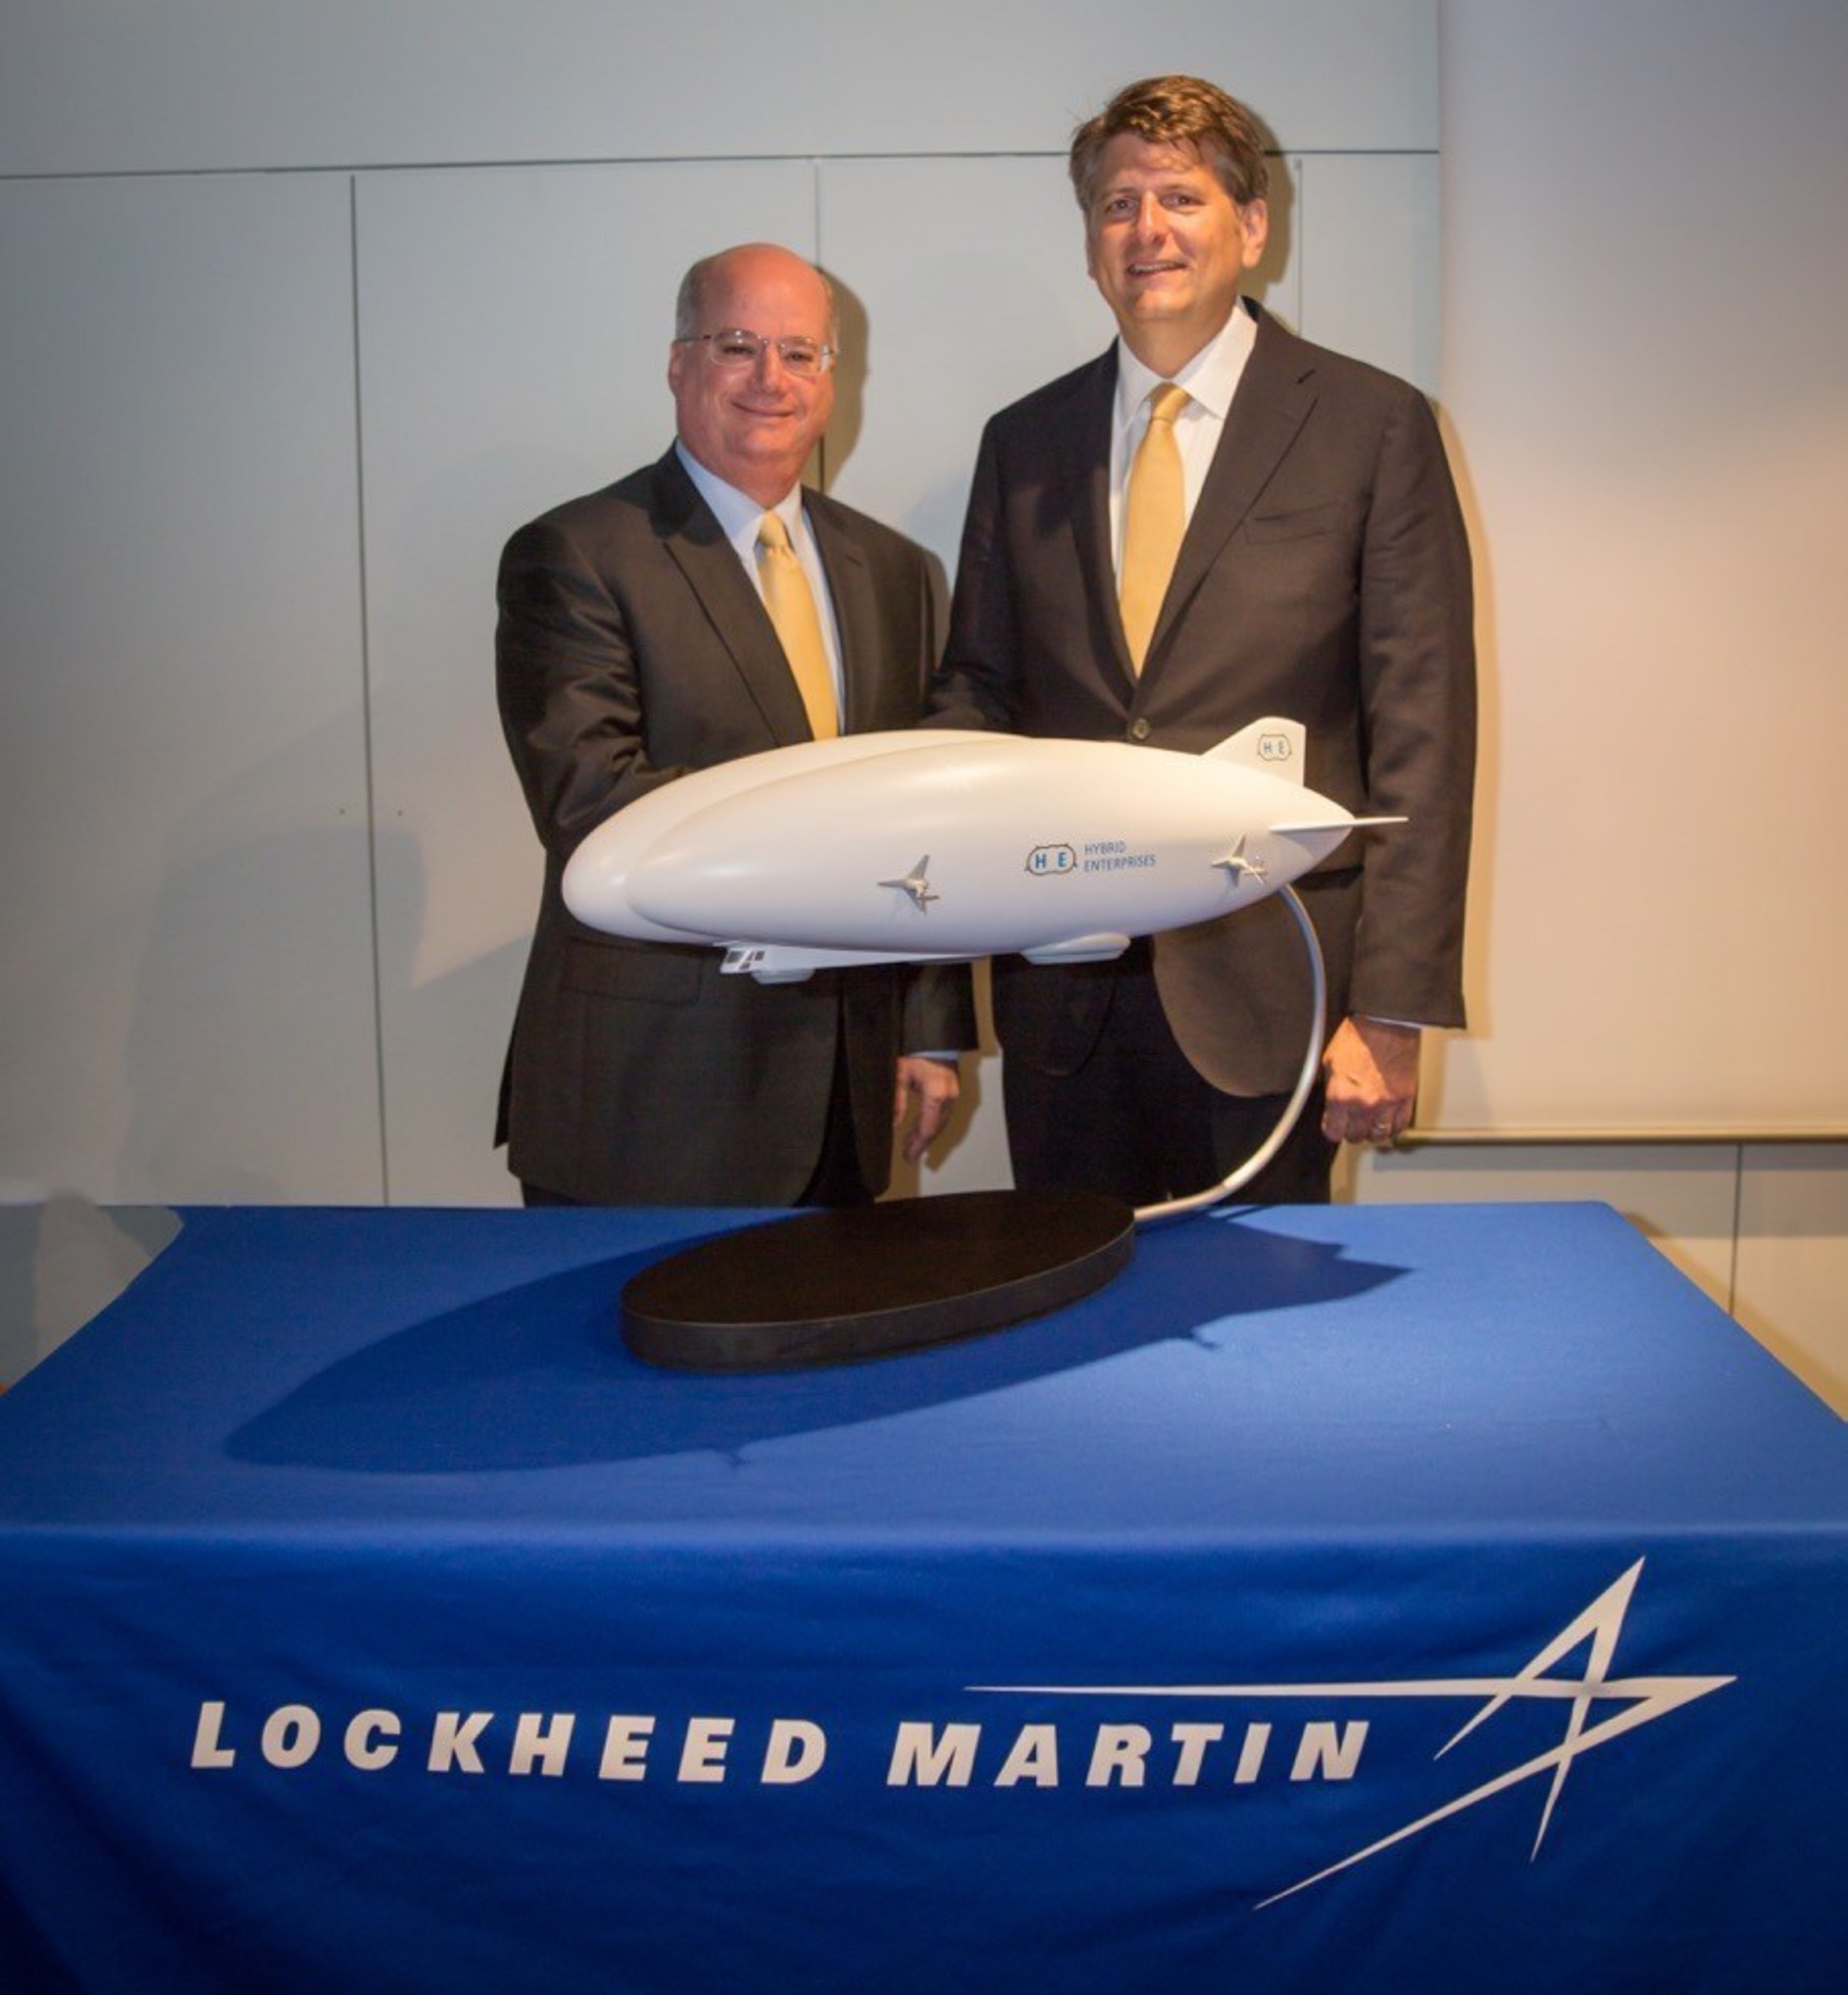 Orlando Carvalho (left), executive vice president of Lockheed Martin's Aeronautics business, and Rob Binns, chief executive officer of Hybrid Enterprises, with a  model of Lockheed Martin's Hybrid Airship after signing a strategic alliance wherein Hybrid Enterprises will be the exclusive, authorized reseller of Lockheed Martin's Hybrid Airships.